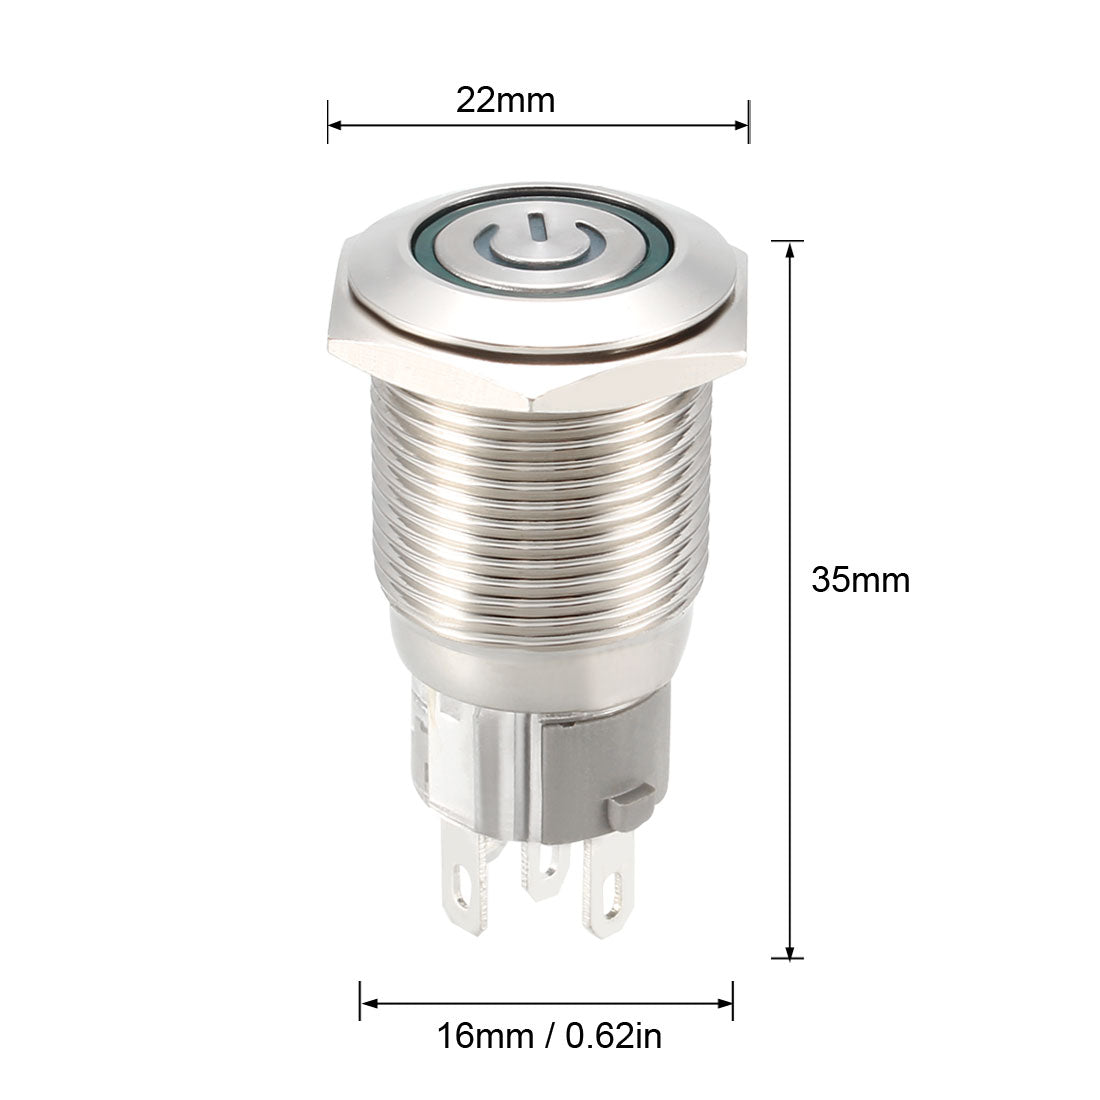 uxcell Uxcell Momentary Metal Push Button Switch 16mm Mounting 1NC NO COM 12V LED with Socket Plug